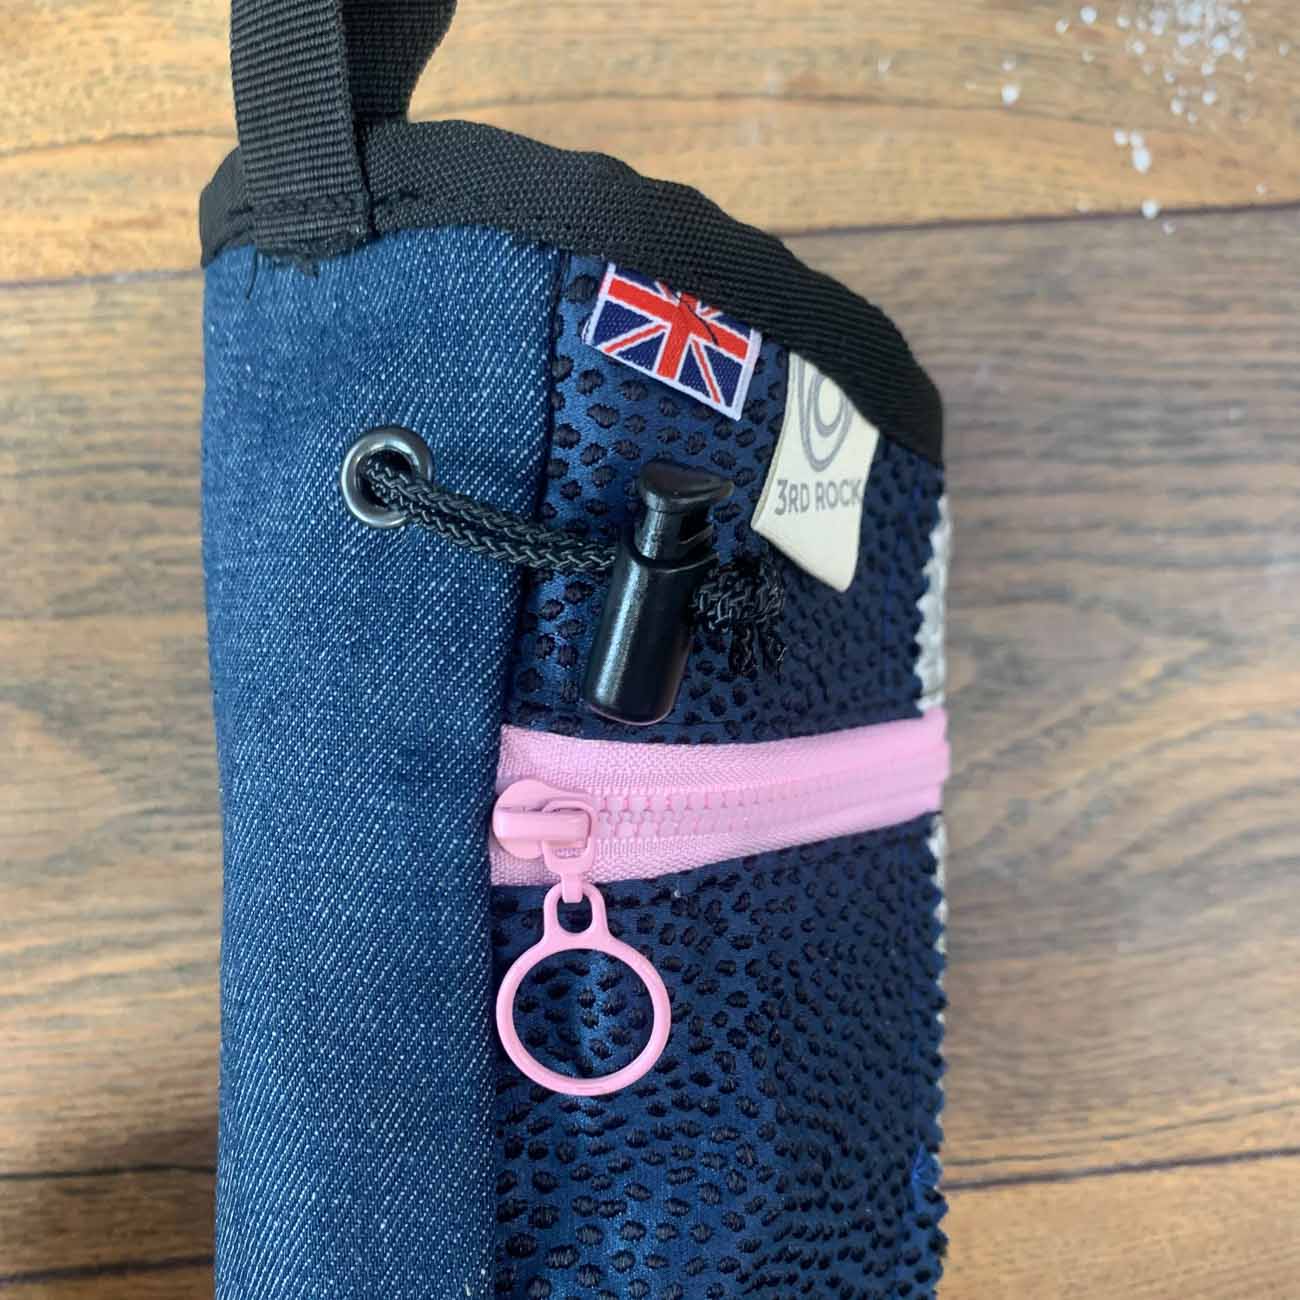 3rd Rock - Patch - Upcycled Chalk Bag - Starry Nightfall